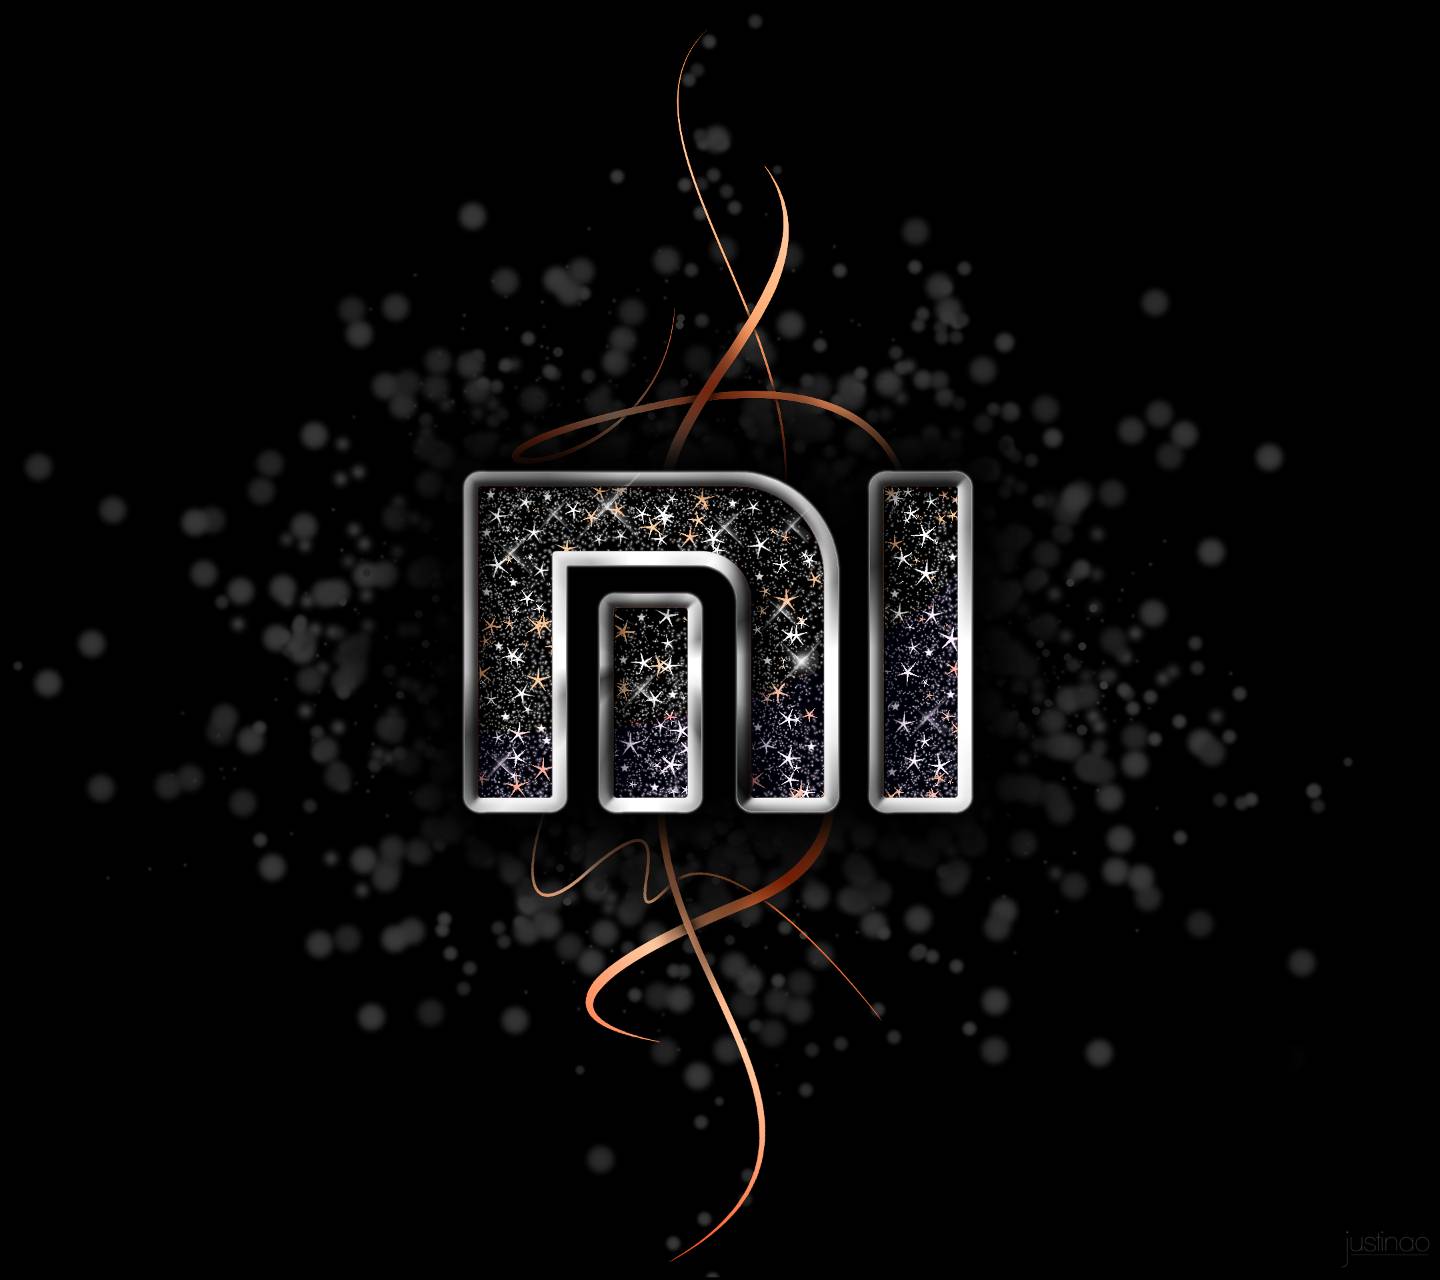 Download free mi logo wallpaper for your mobile phone